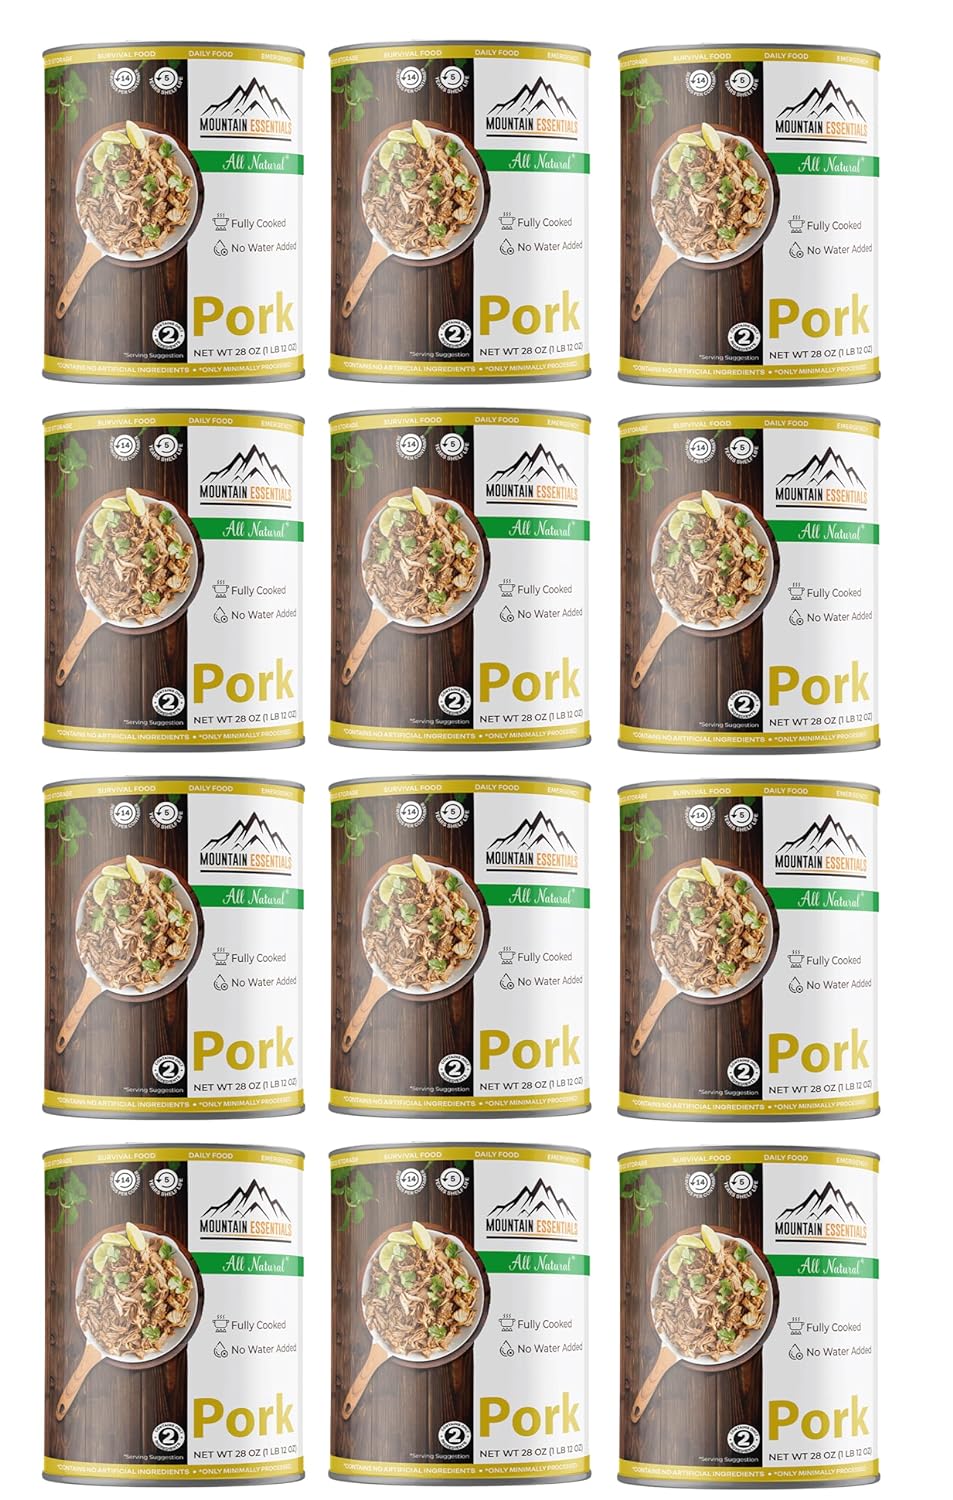 MOUNTAIN ESSENTIALS All Natural Canned Pork 28 Oz Fully Cooked Ready to Eat Emergency Survival Bulk Food Storage Premium Meat for Backpacking, Camping, Meal Prep Shelf Stable Food Pack of 12